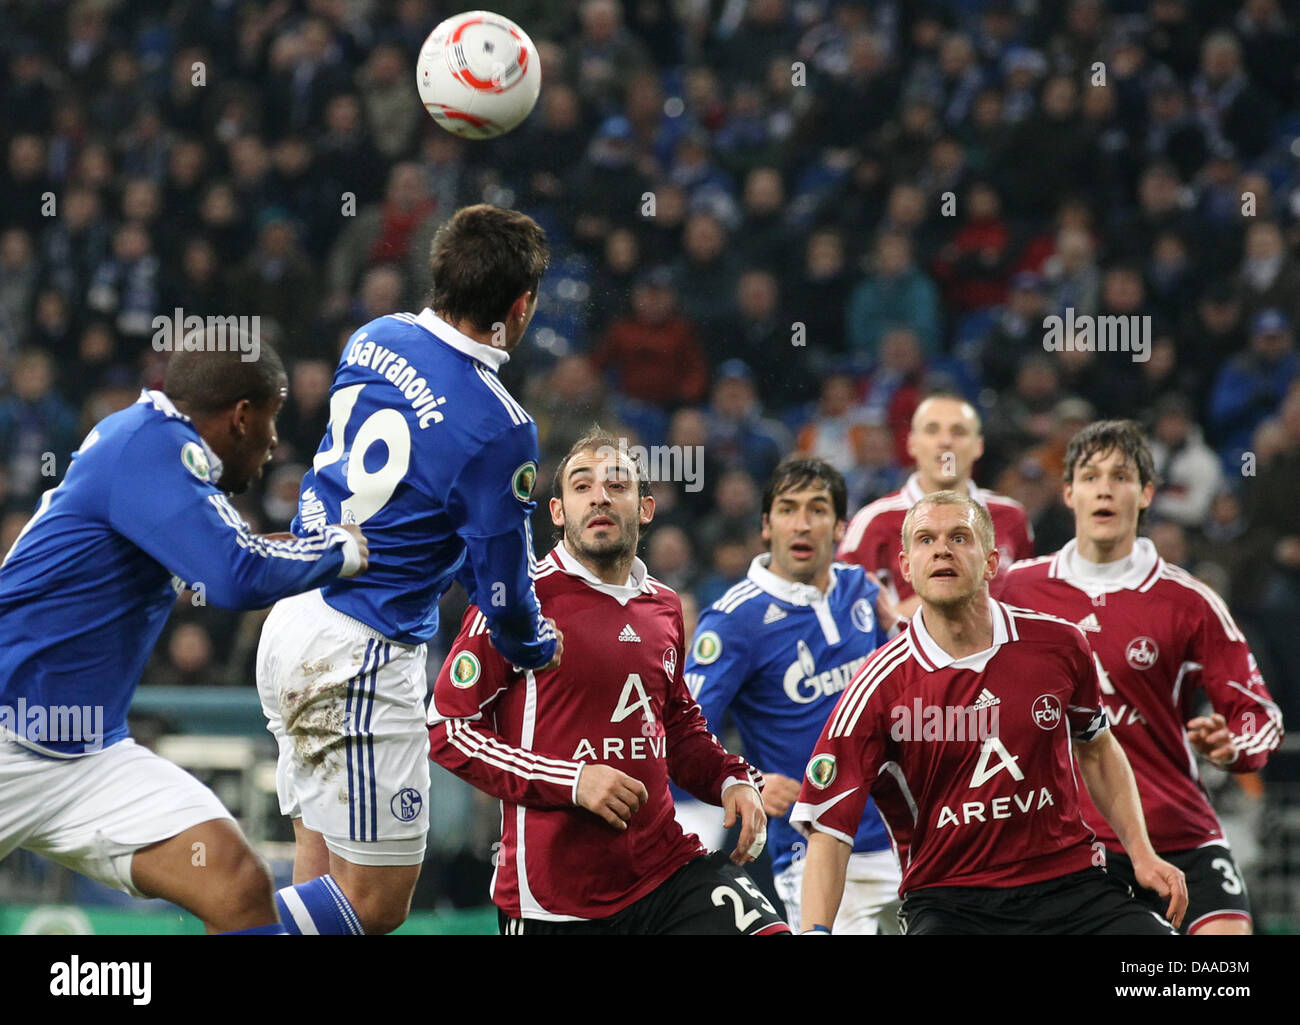 DFB-Cup Soccer Quarter-Finale: FC Schalke 04 versus 1.FC. Nürnberg on 25 January 2011 at the Veltins-Arena in Gelsenkirchen, Germany. The Schalke player Mario Gavranovic (2nd from left) fighting for the ball with Nürnberg players Horacio Javier Pinola (middle) and Andreas Wolf (2nd from right). Schalke won 3:2 after extra time. Photo: Friso Gentsch    (ATTENTION: The DFB prohibits  Stock Photo